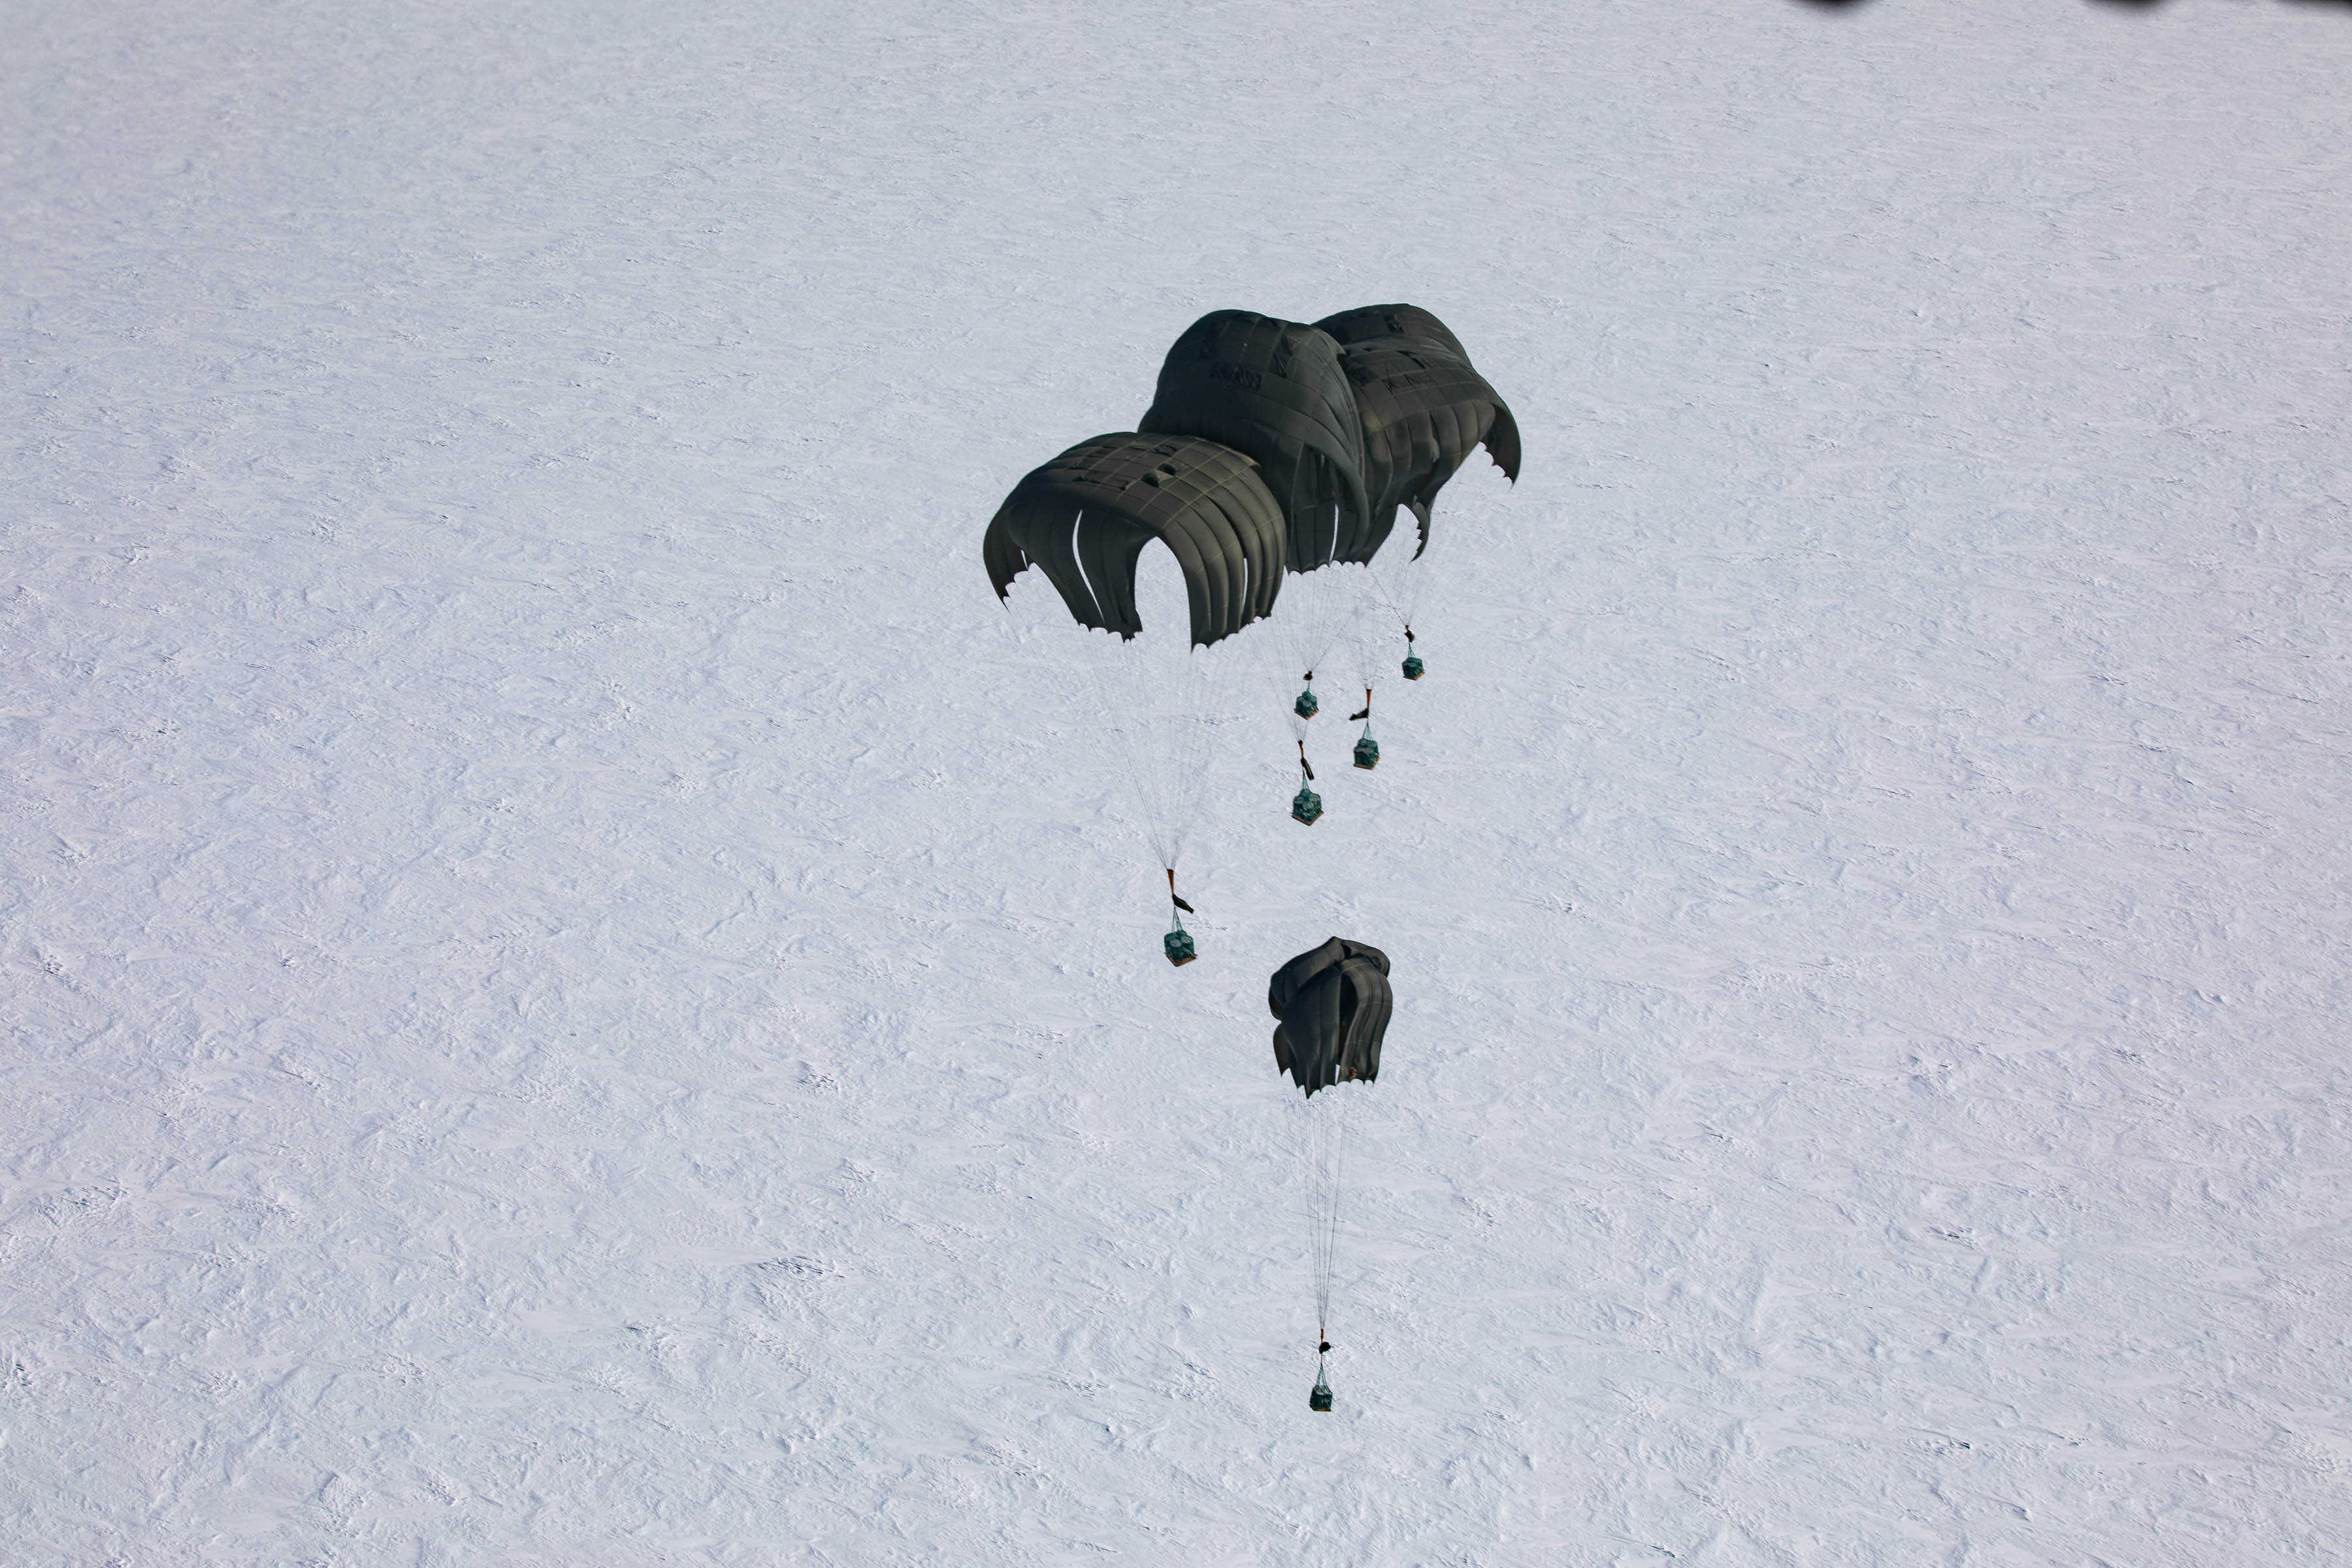 Supplies being parachuted to the ground mid-drop.